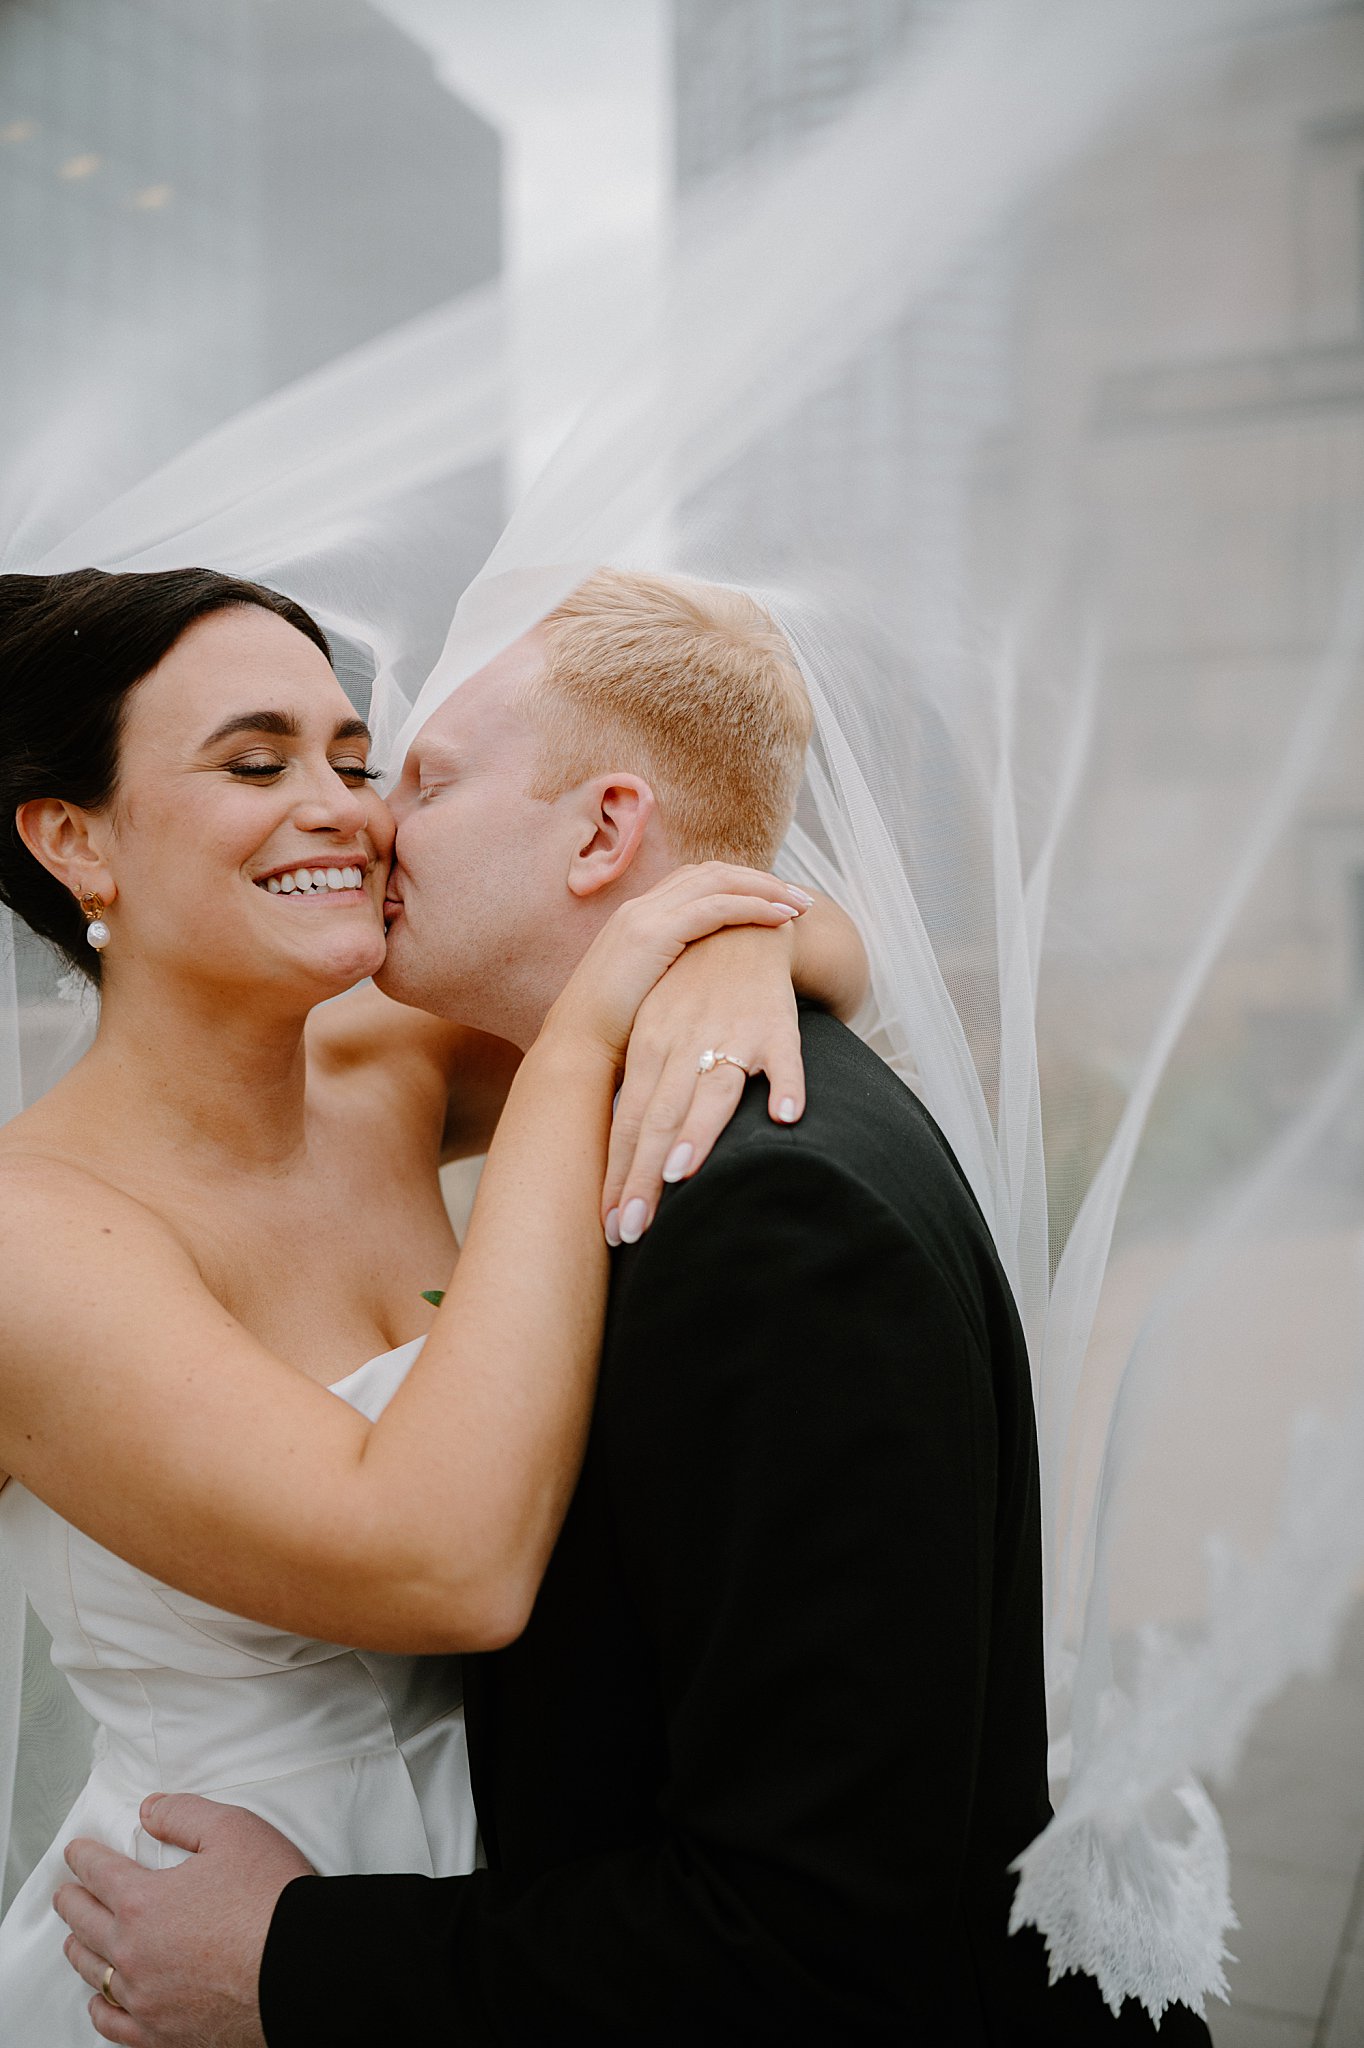 groom kisses bride on the cheek as her veil blows in wind around them by Midwest wedding photographer